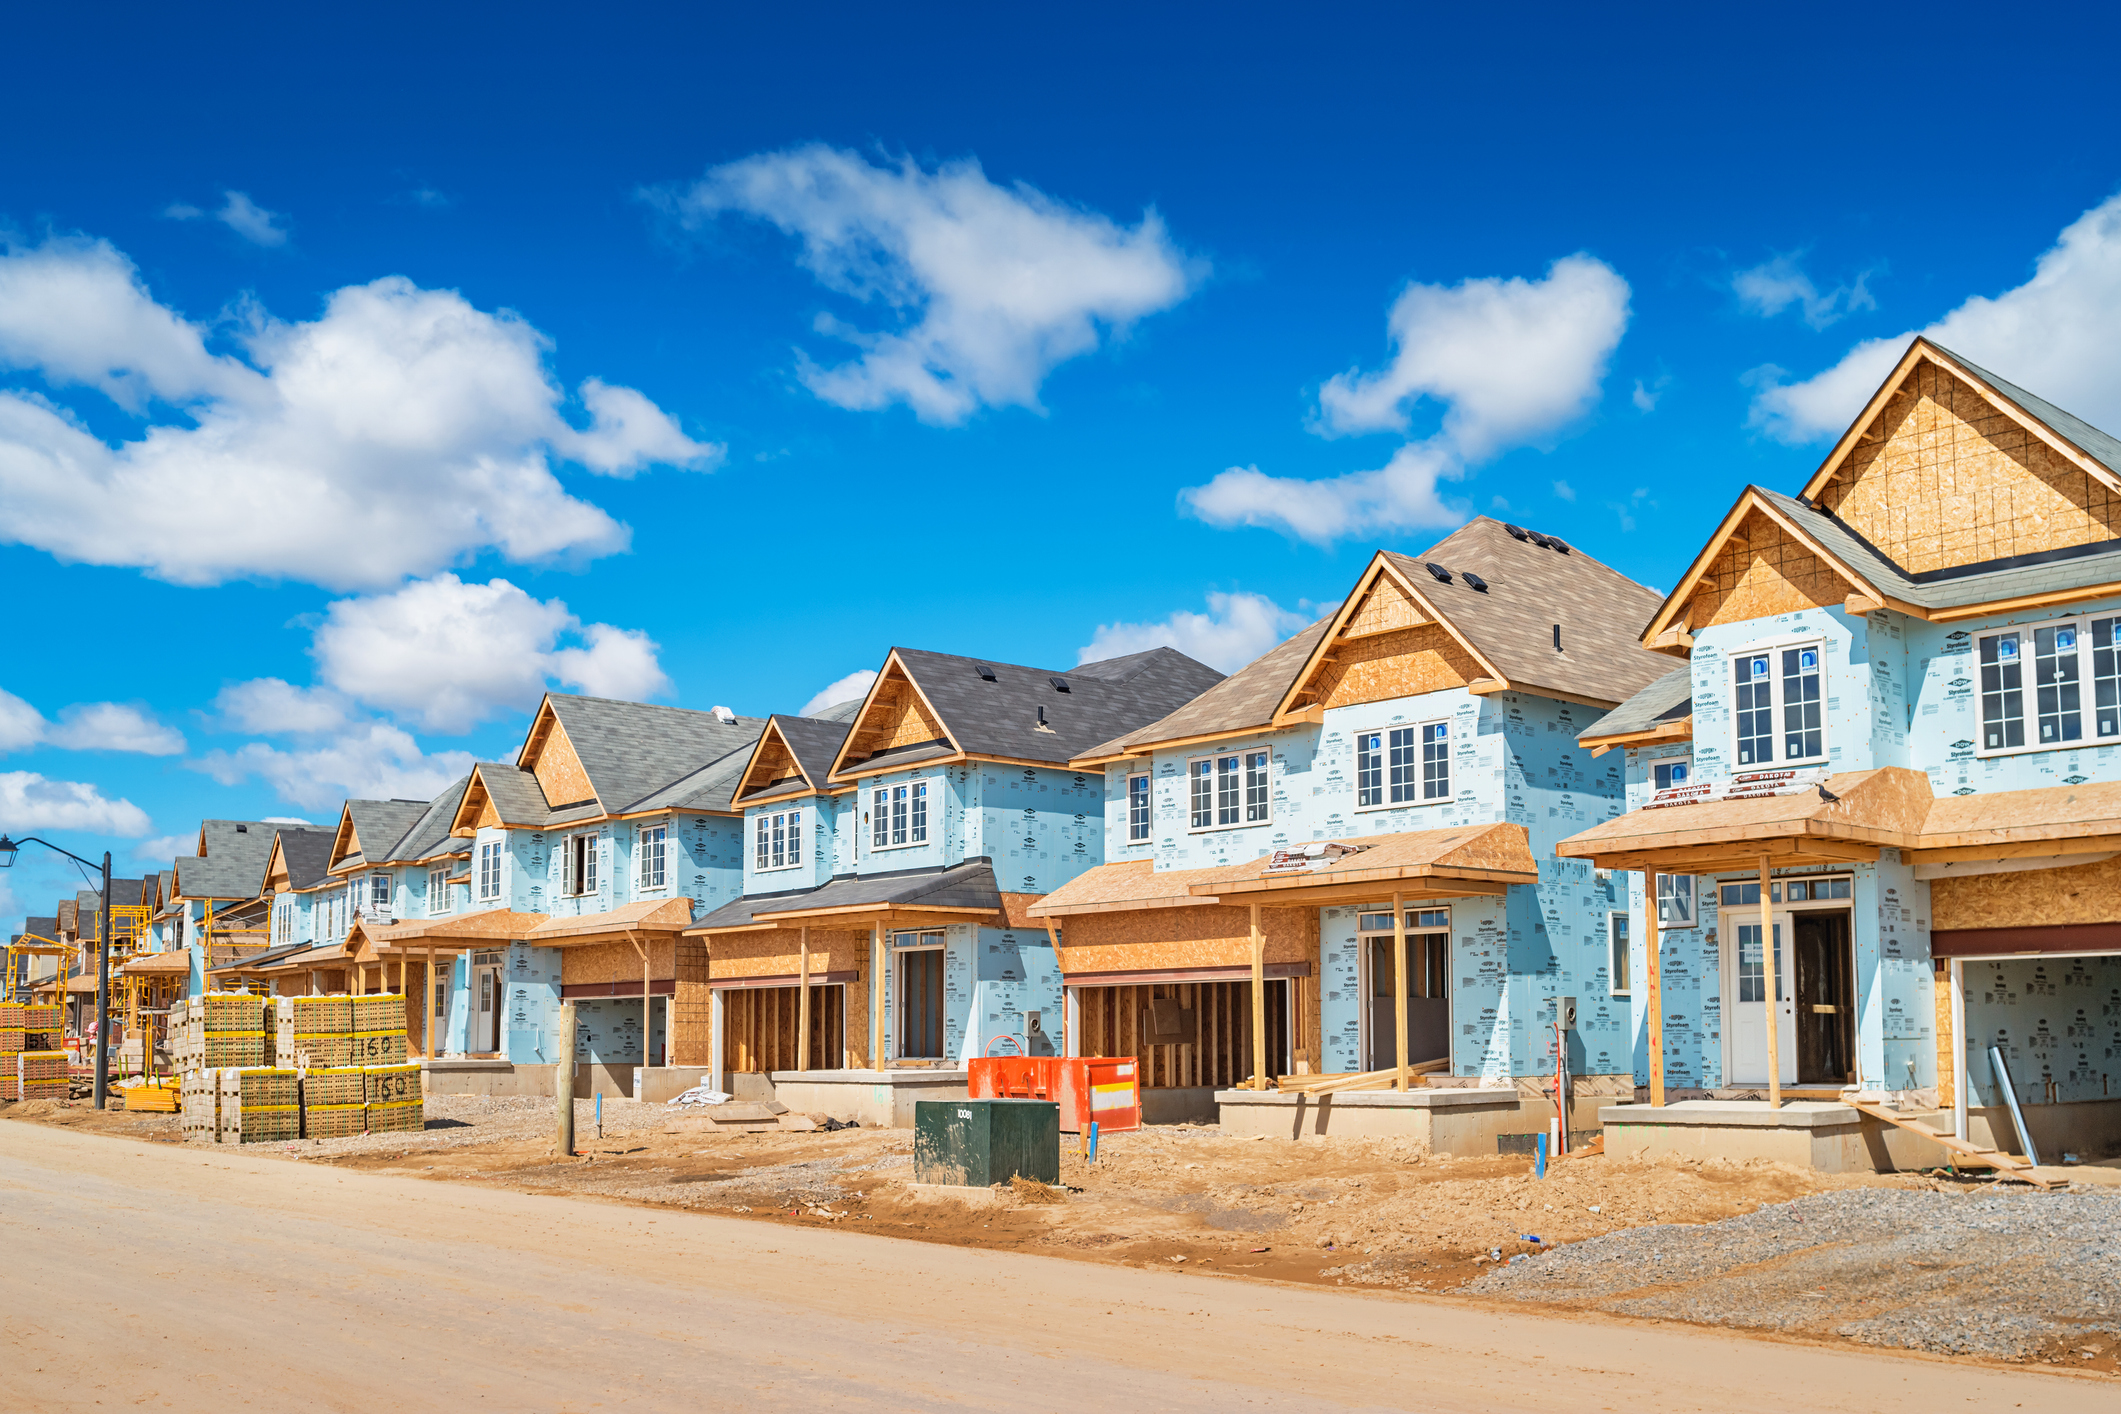 New houses are under construction in a new residential district in Brantford Ontario Canada on a sunny day.